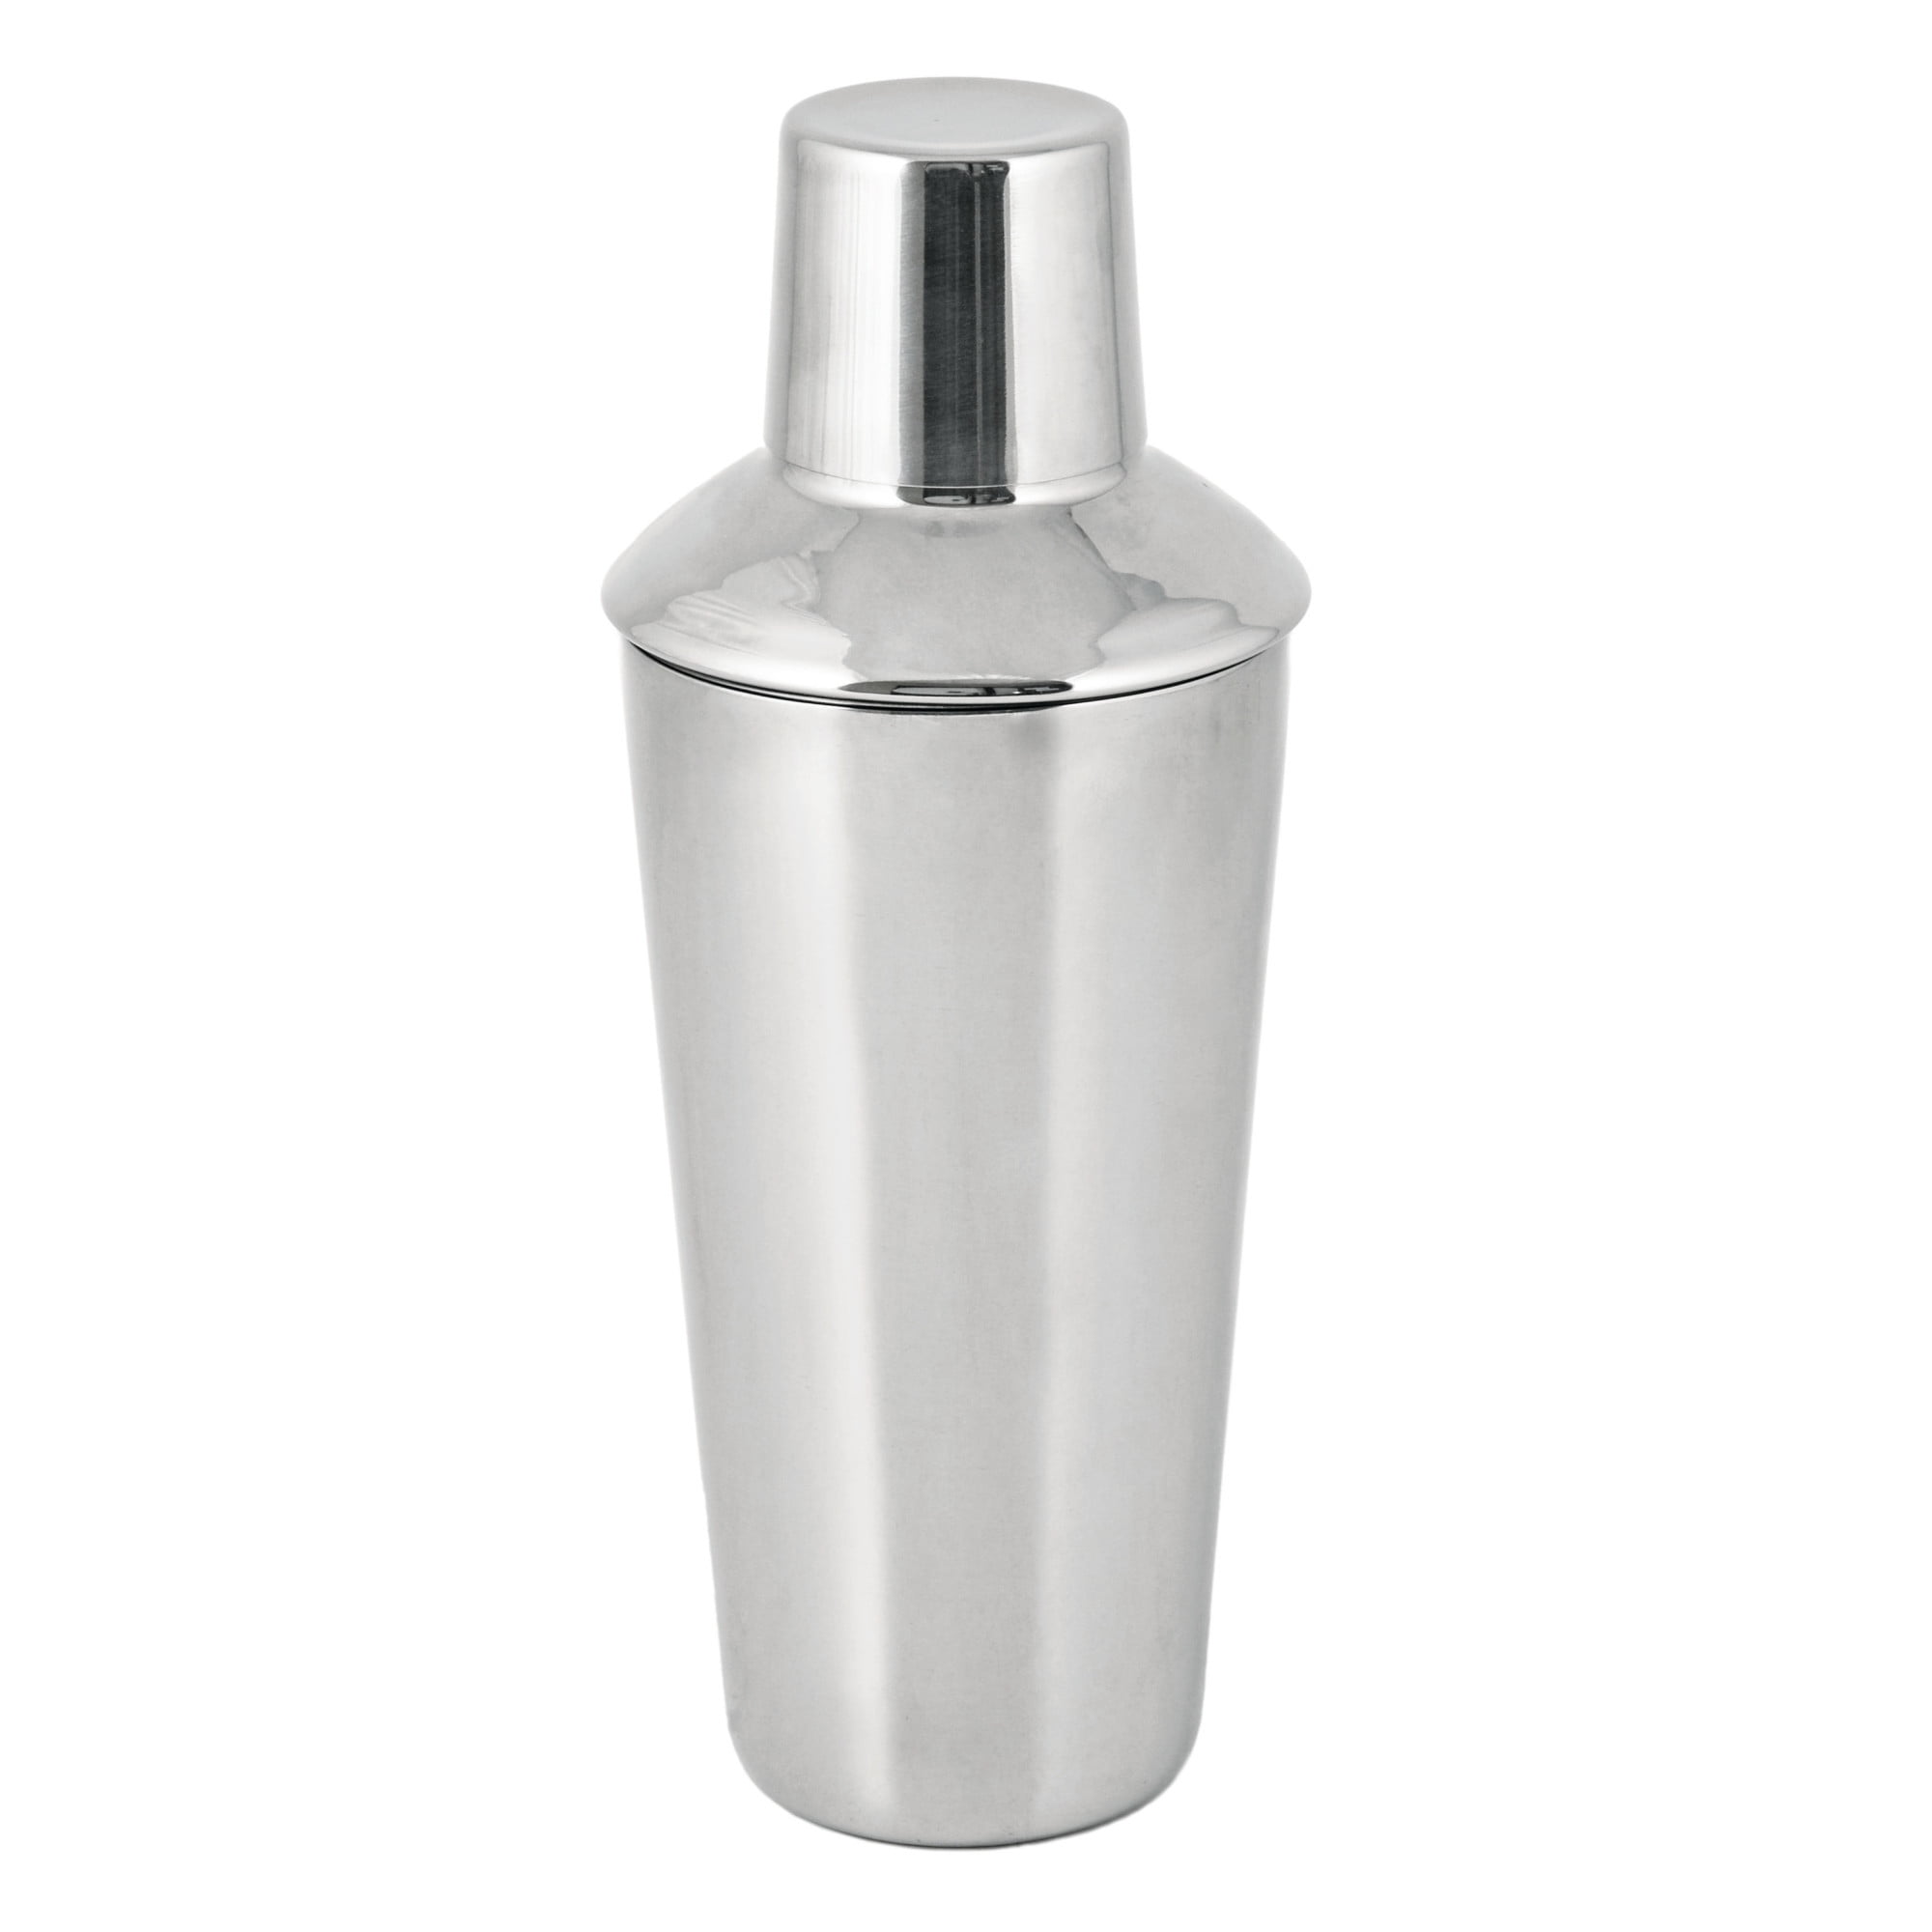 Cocktail Shaker - Stainless Steel w/ Wood Cap - 26 ounce